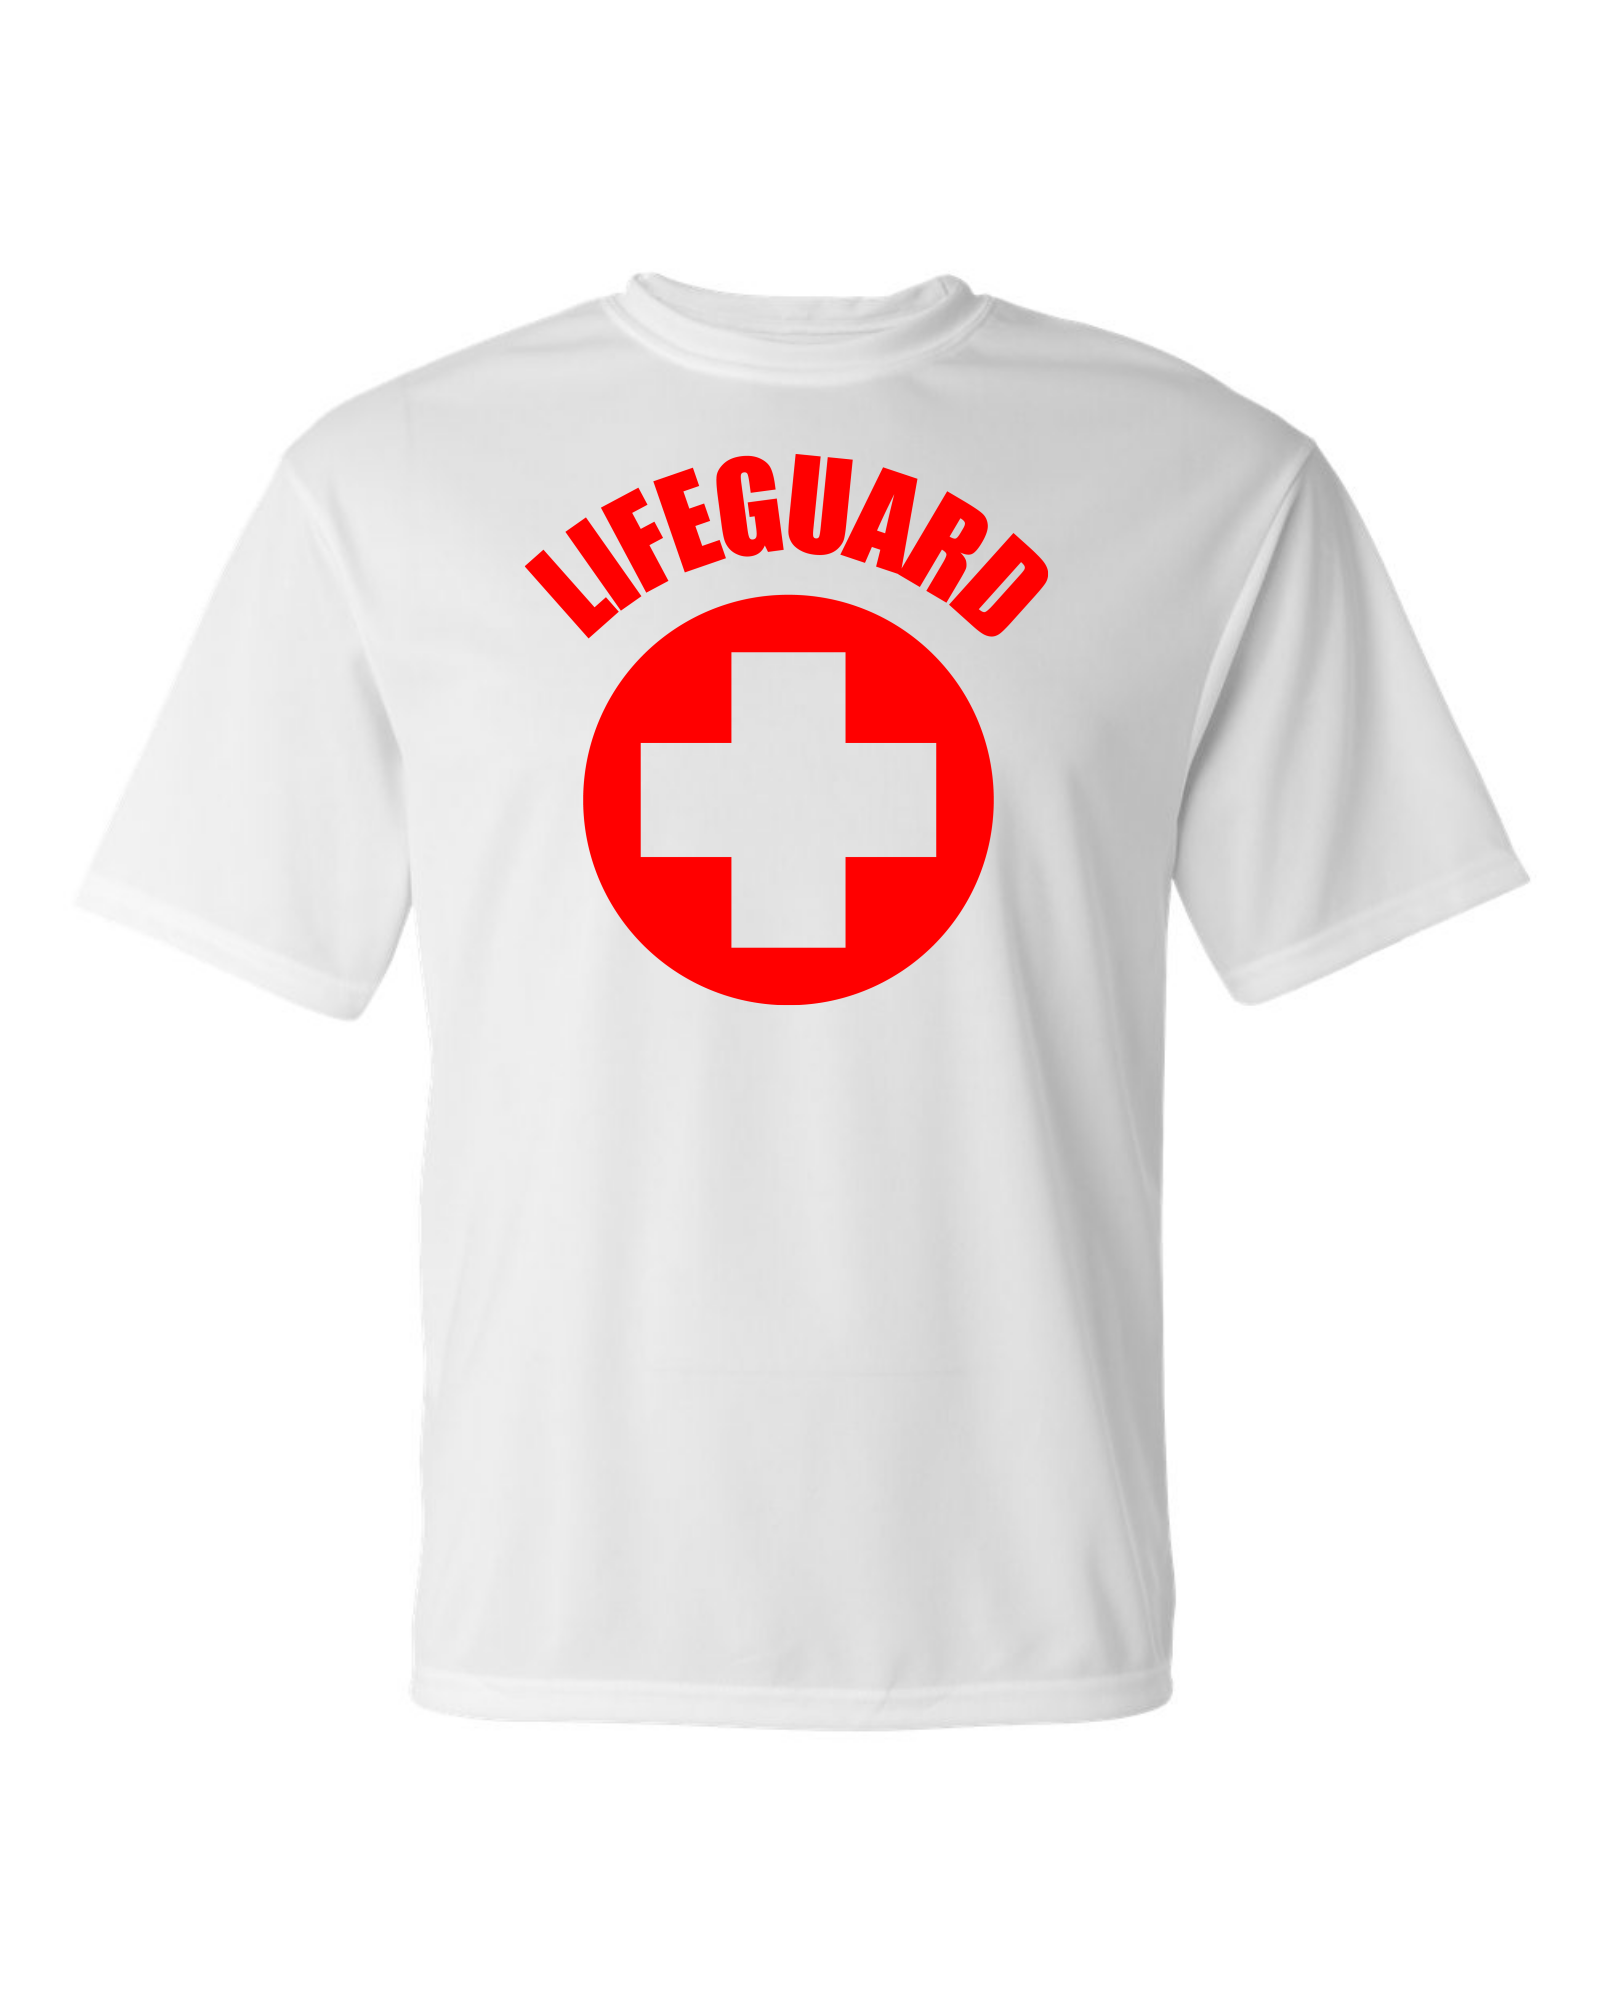 Lifeguard – T-Shirt (Round Logo) - Unique Country Store & More